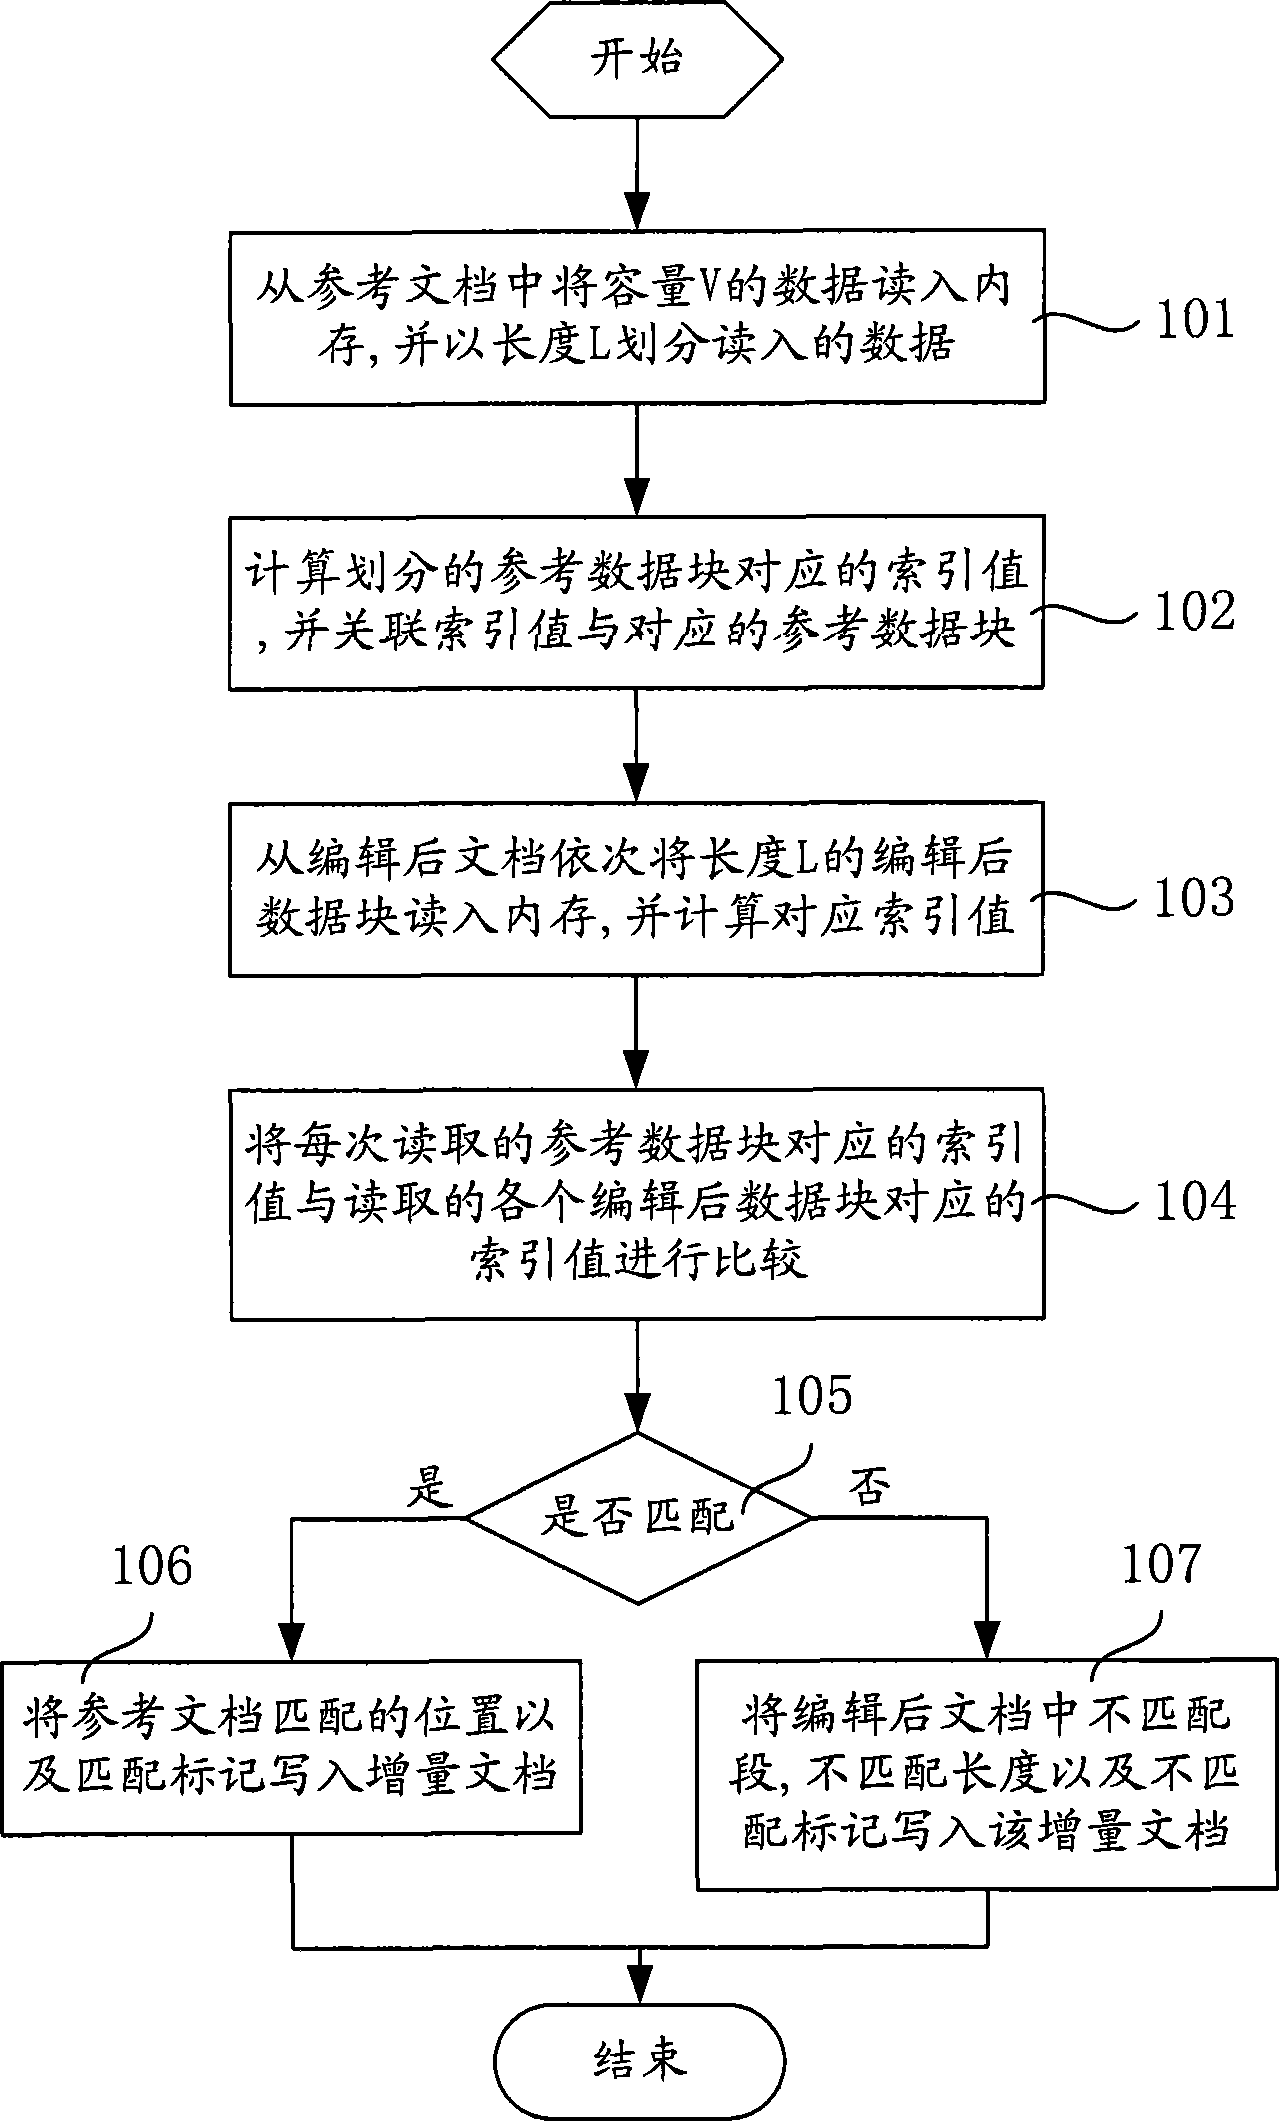 Electronic document increment memory processing method